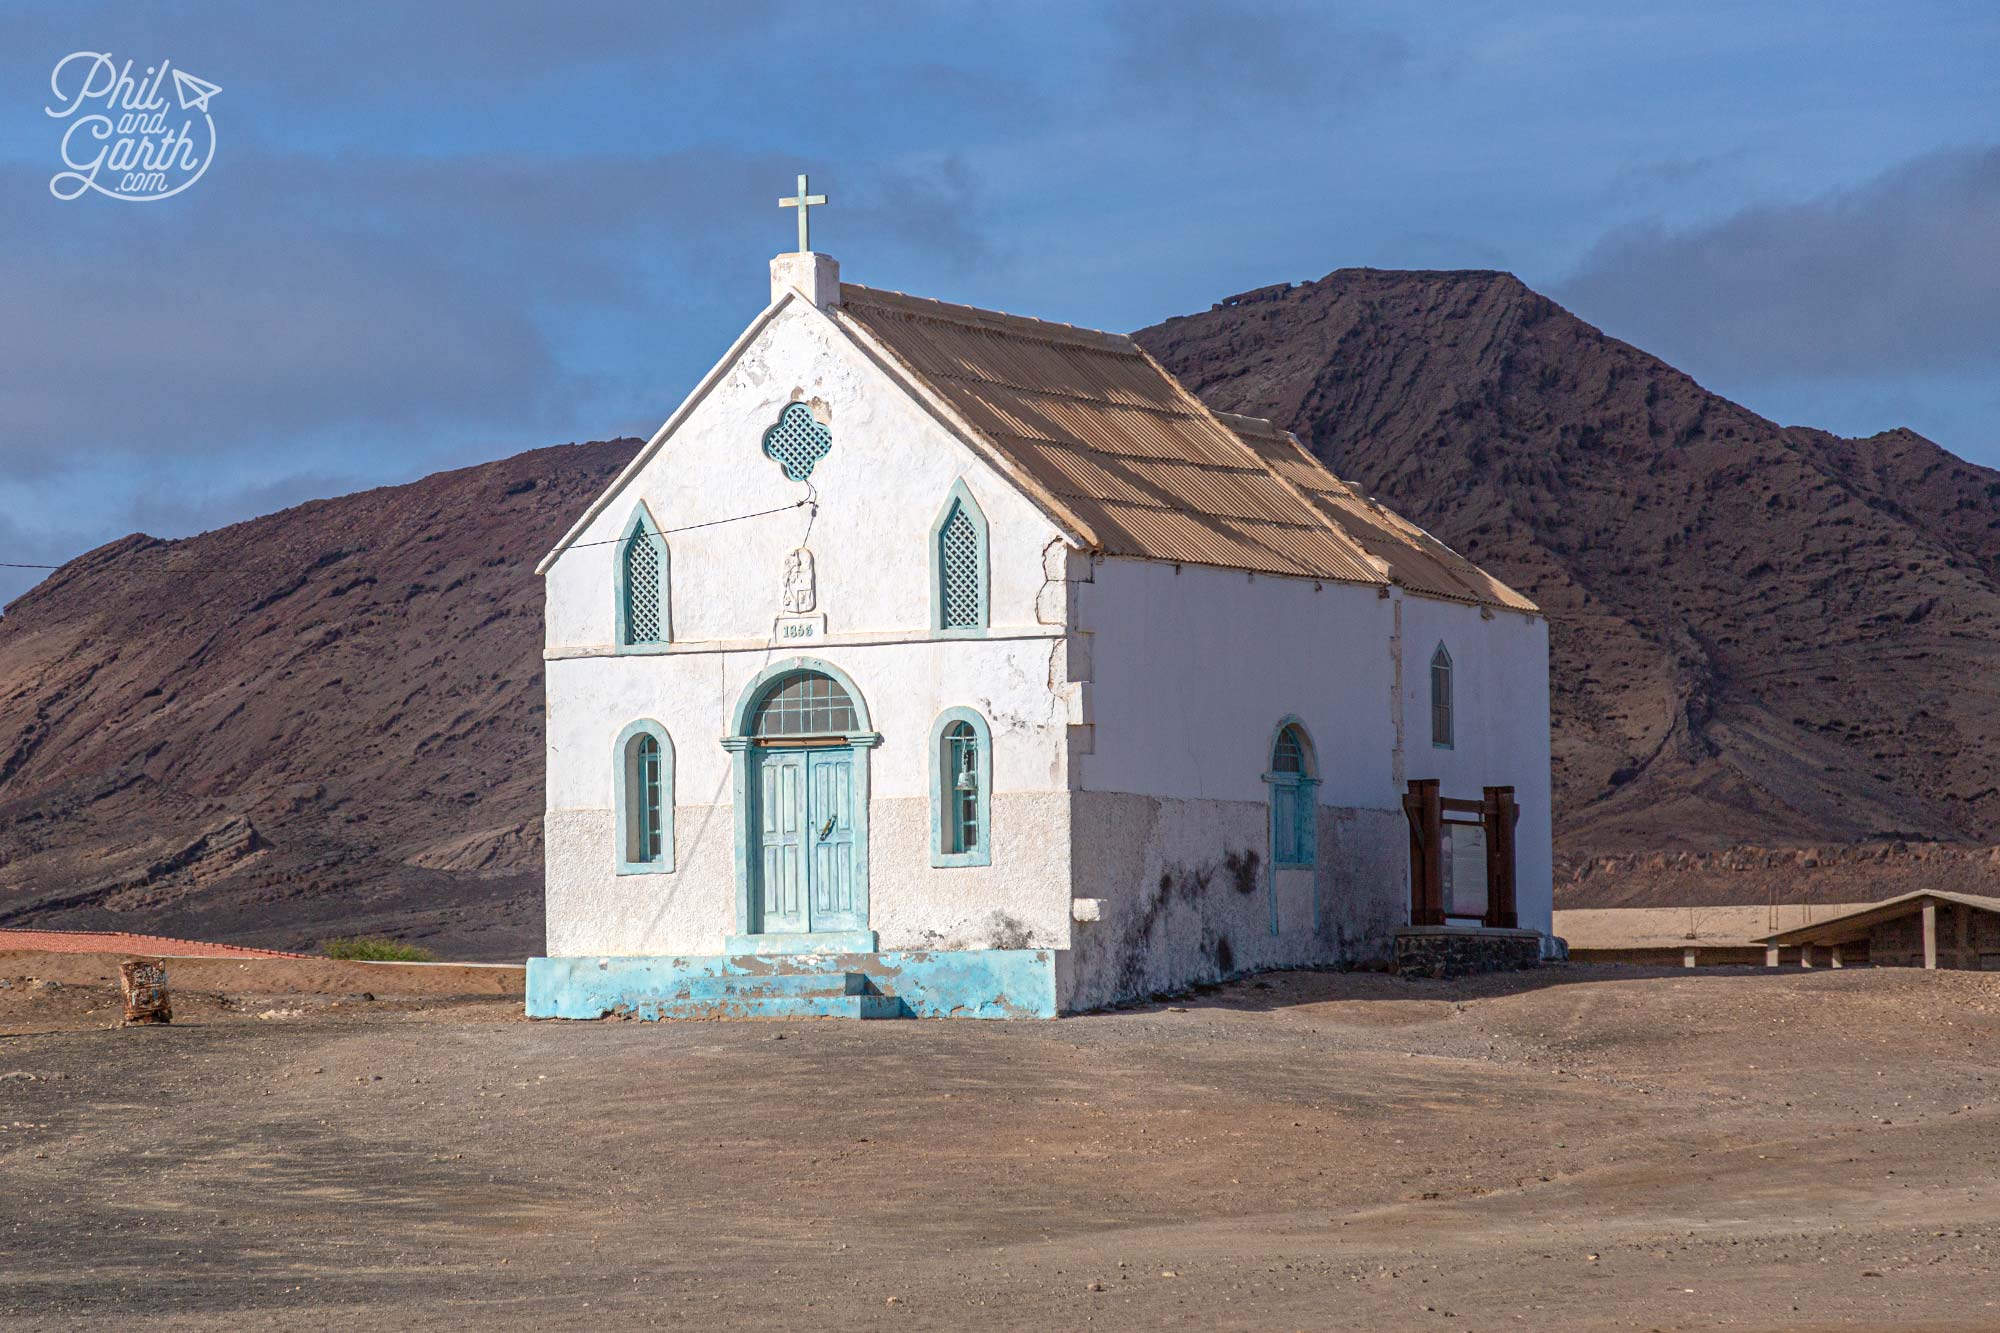 See the isolated church - Lady of Compassion as you drive in or out of the Salinas